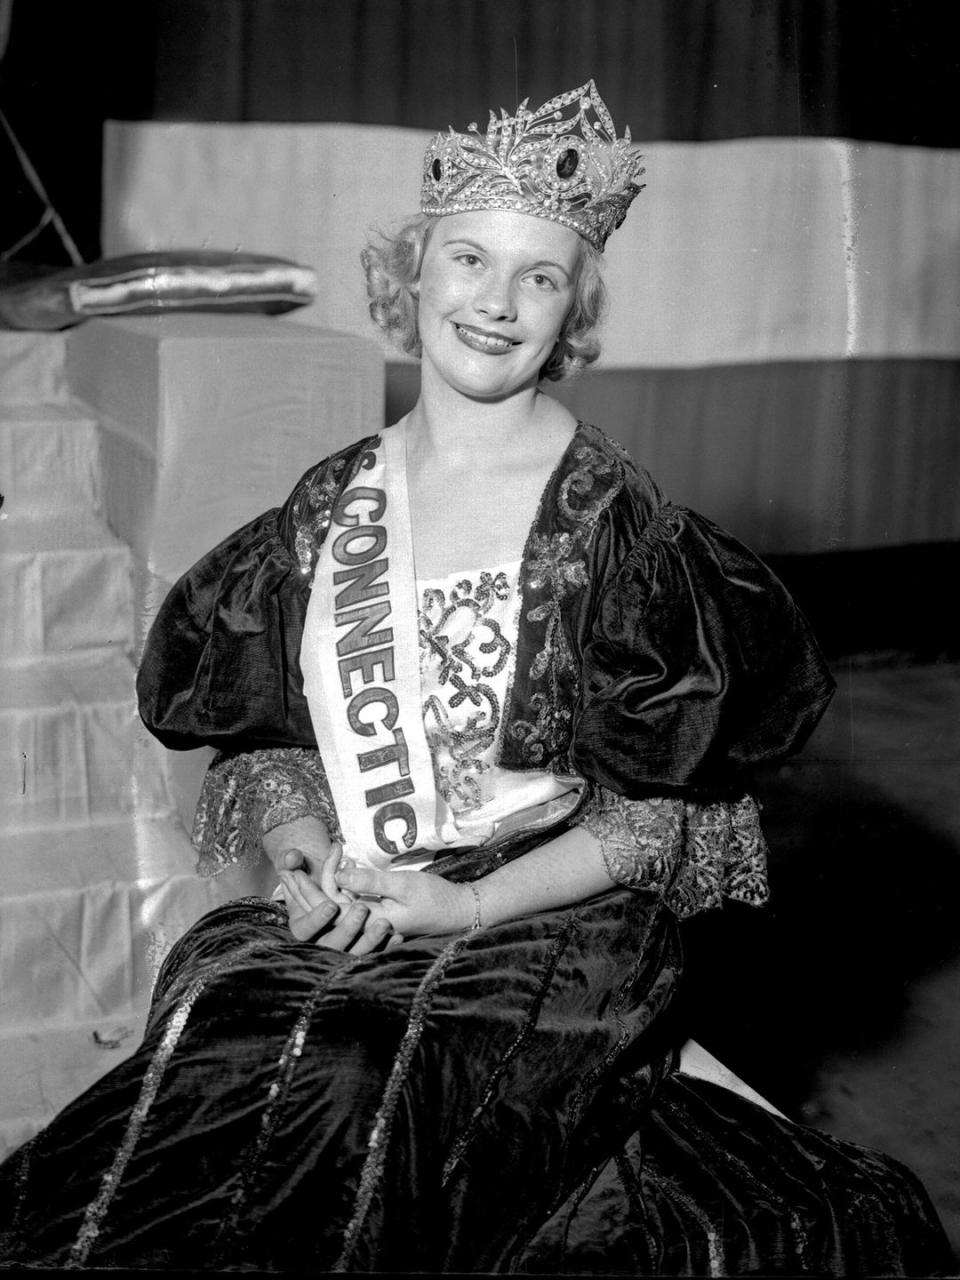 <p>When Marion Bergeron from Connecticut won Miss America, she was wearing an outfit fit for a queen. The puff sleeves and Renaissance design gave off major <em>Romeo and Juliet </em>vibes. </p>